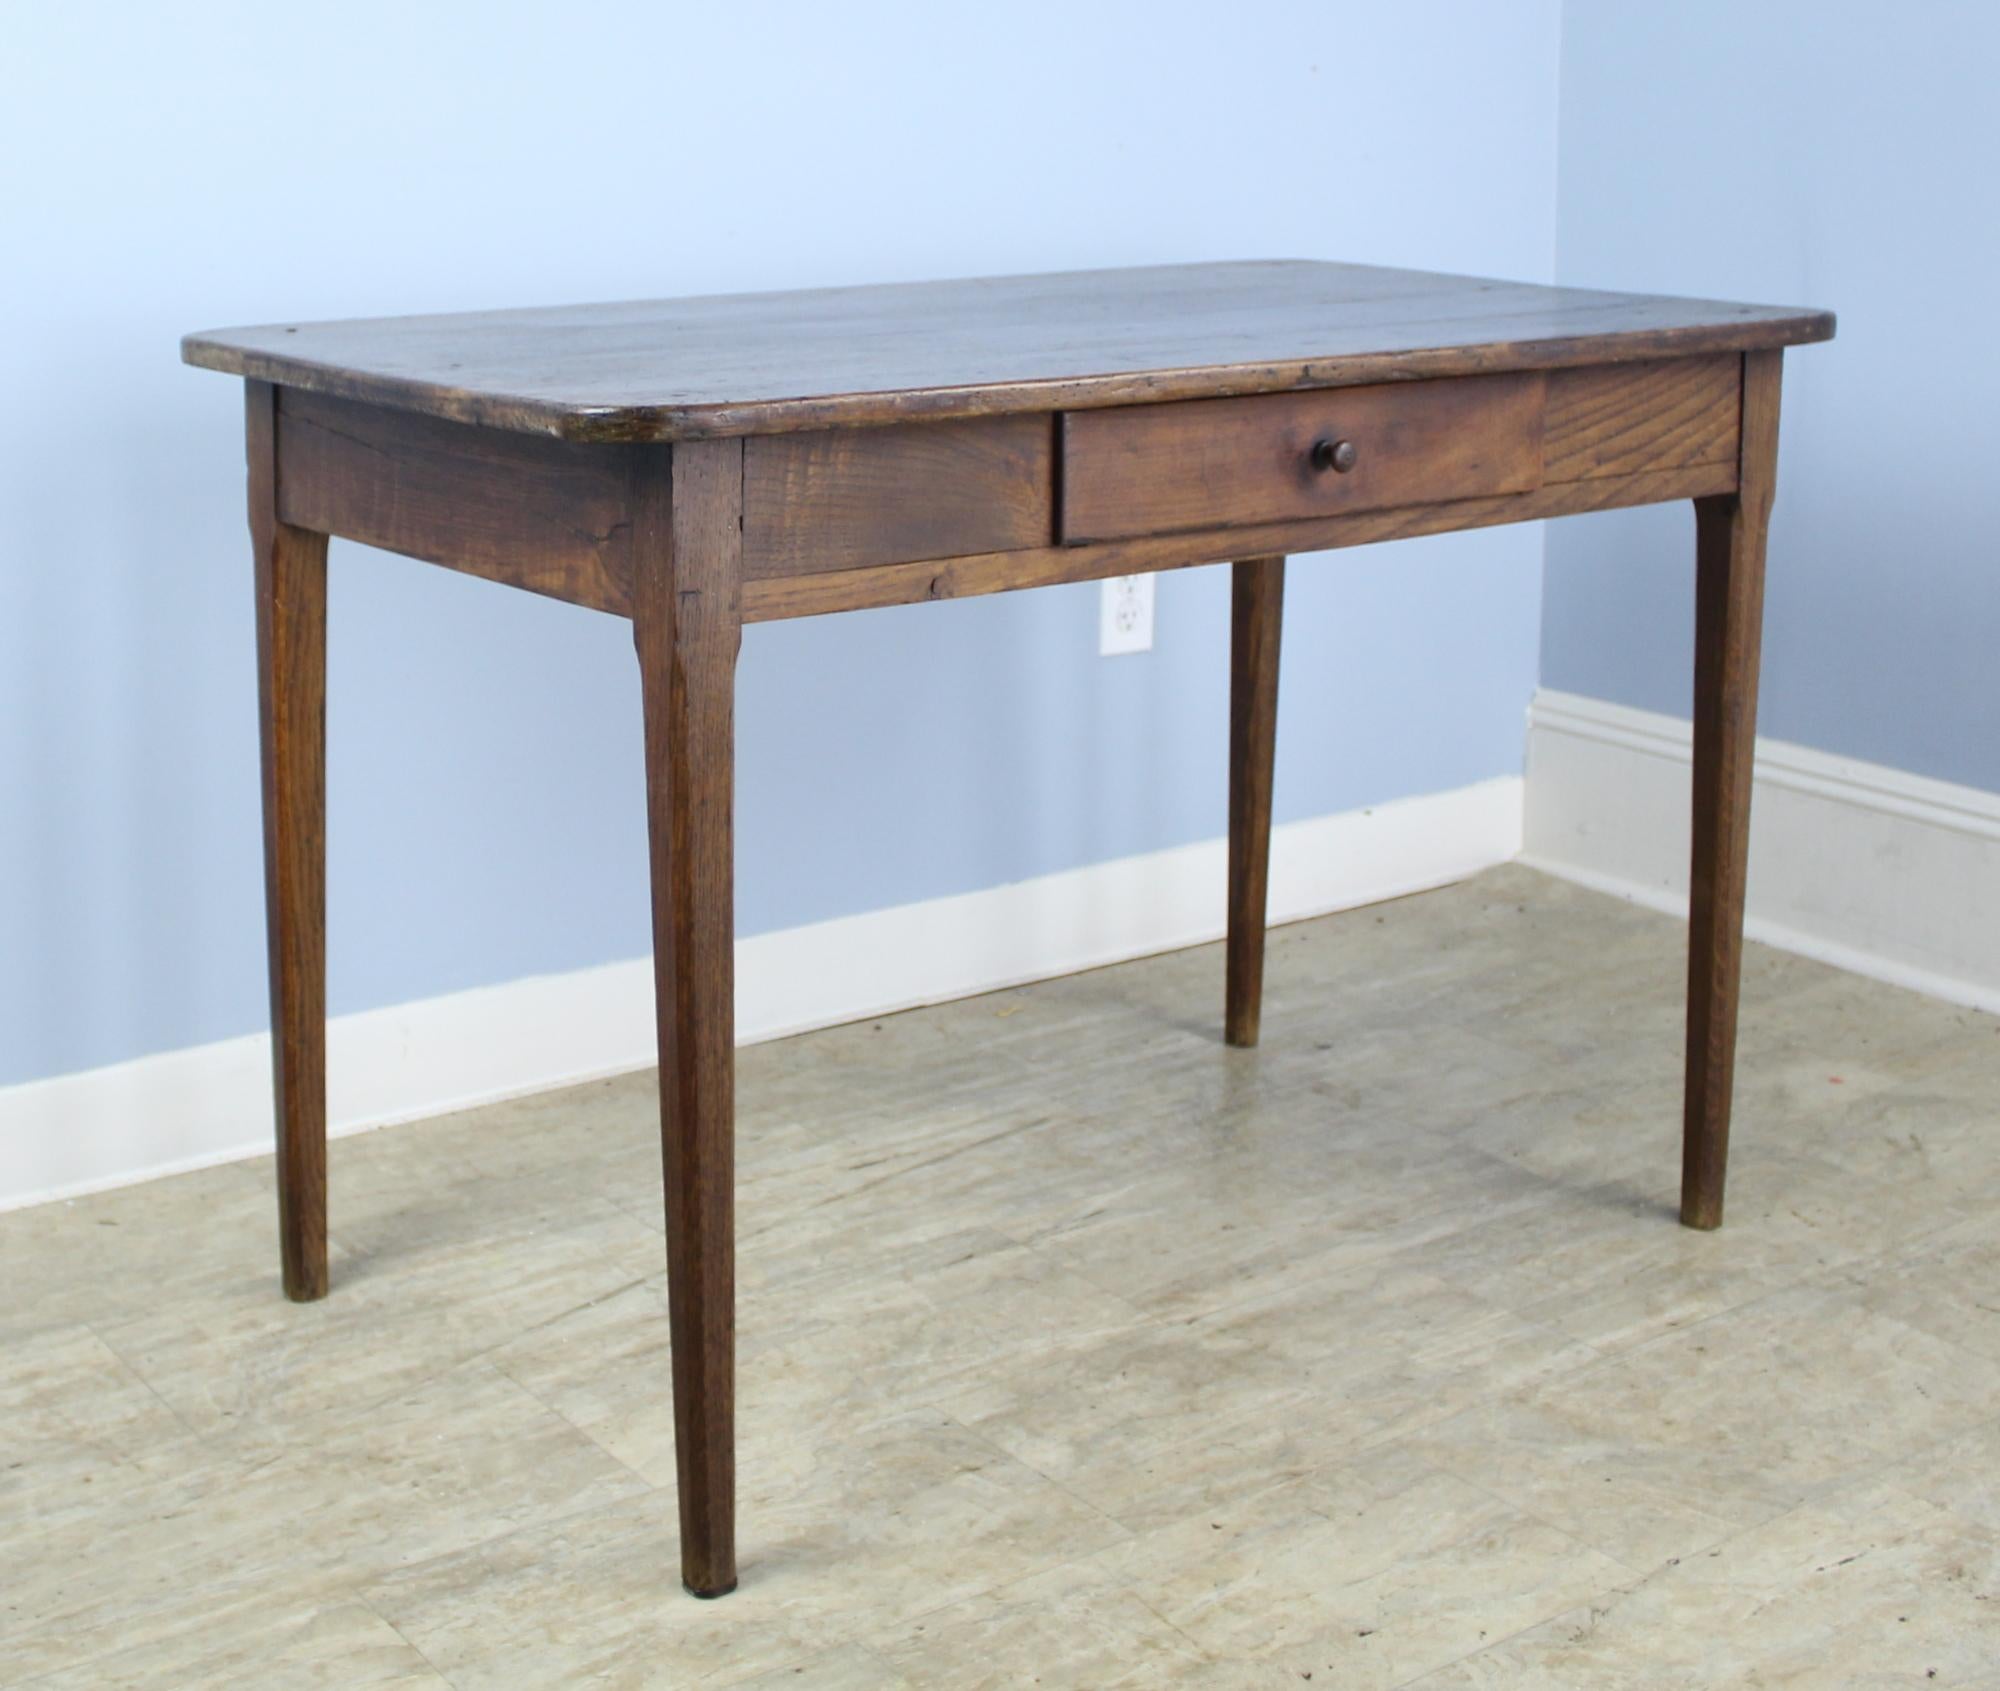 A very good-looking farmhouse country-style desk, in a size suitable for a breakfast table. Apron height of 24.5